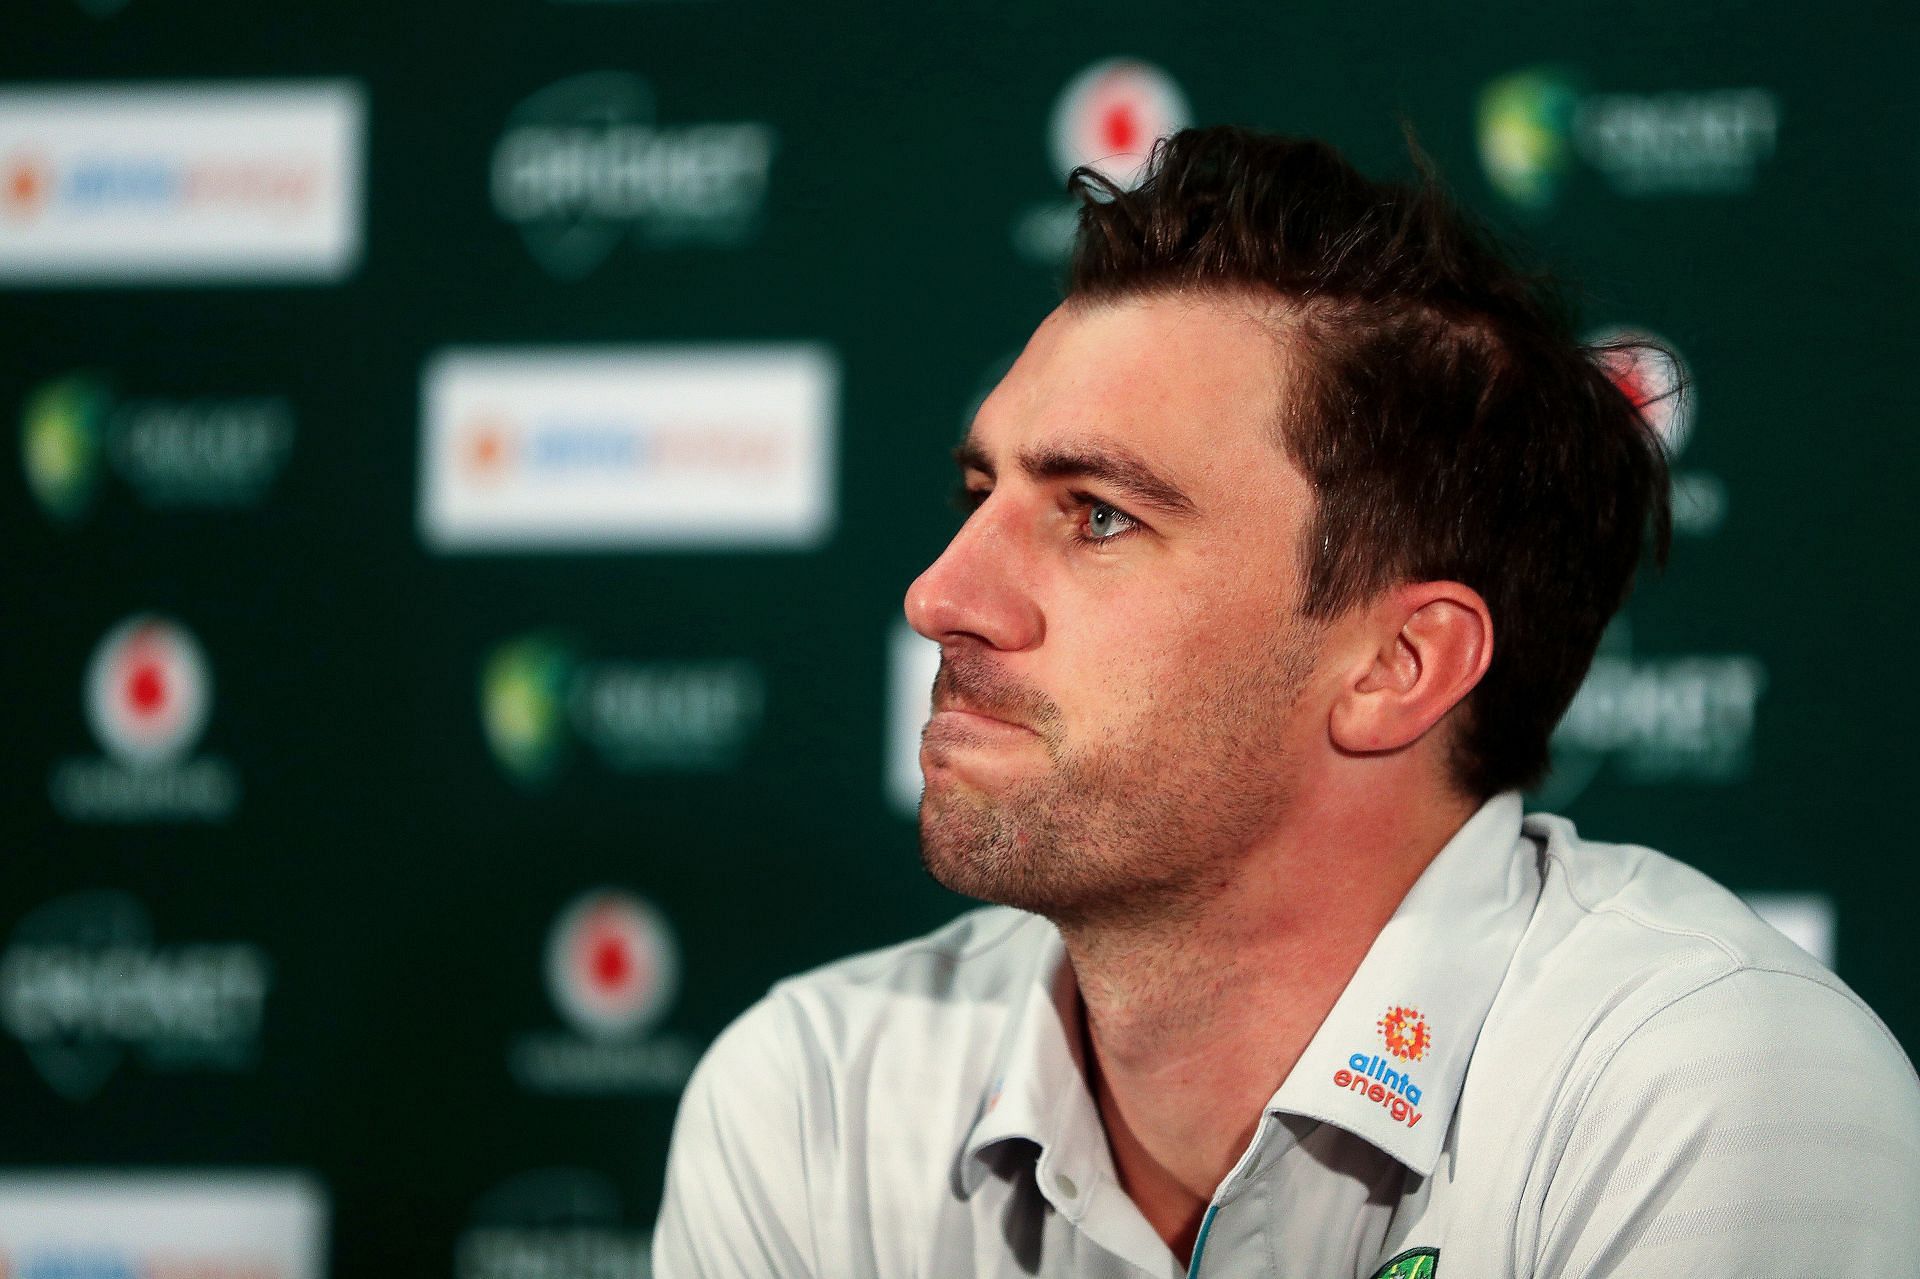 Pat Cummins has been ruled out of the 2nd Ashes test at the Adelaide Oval.